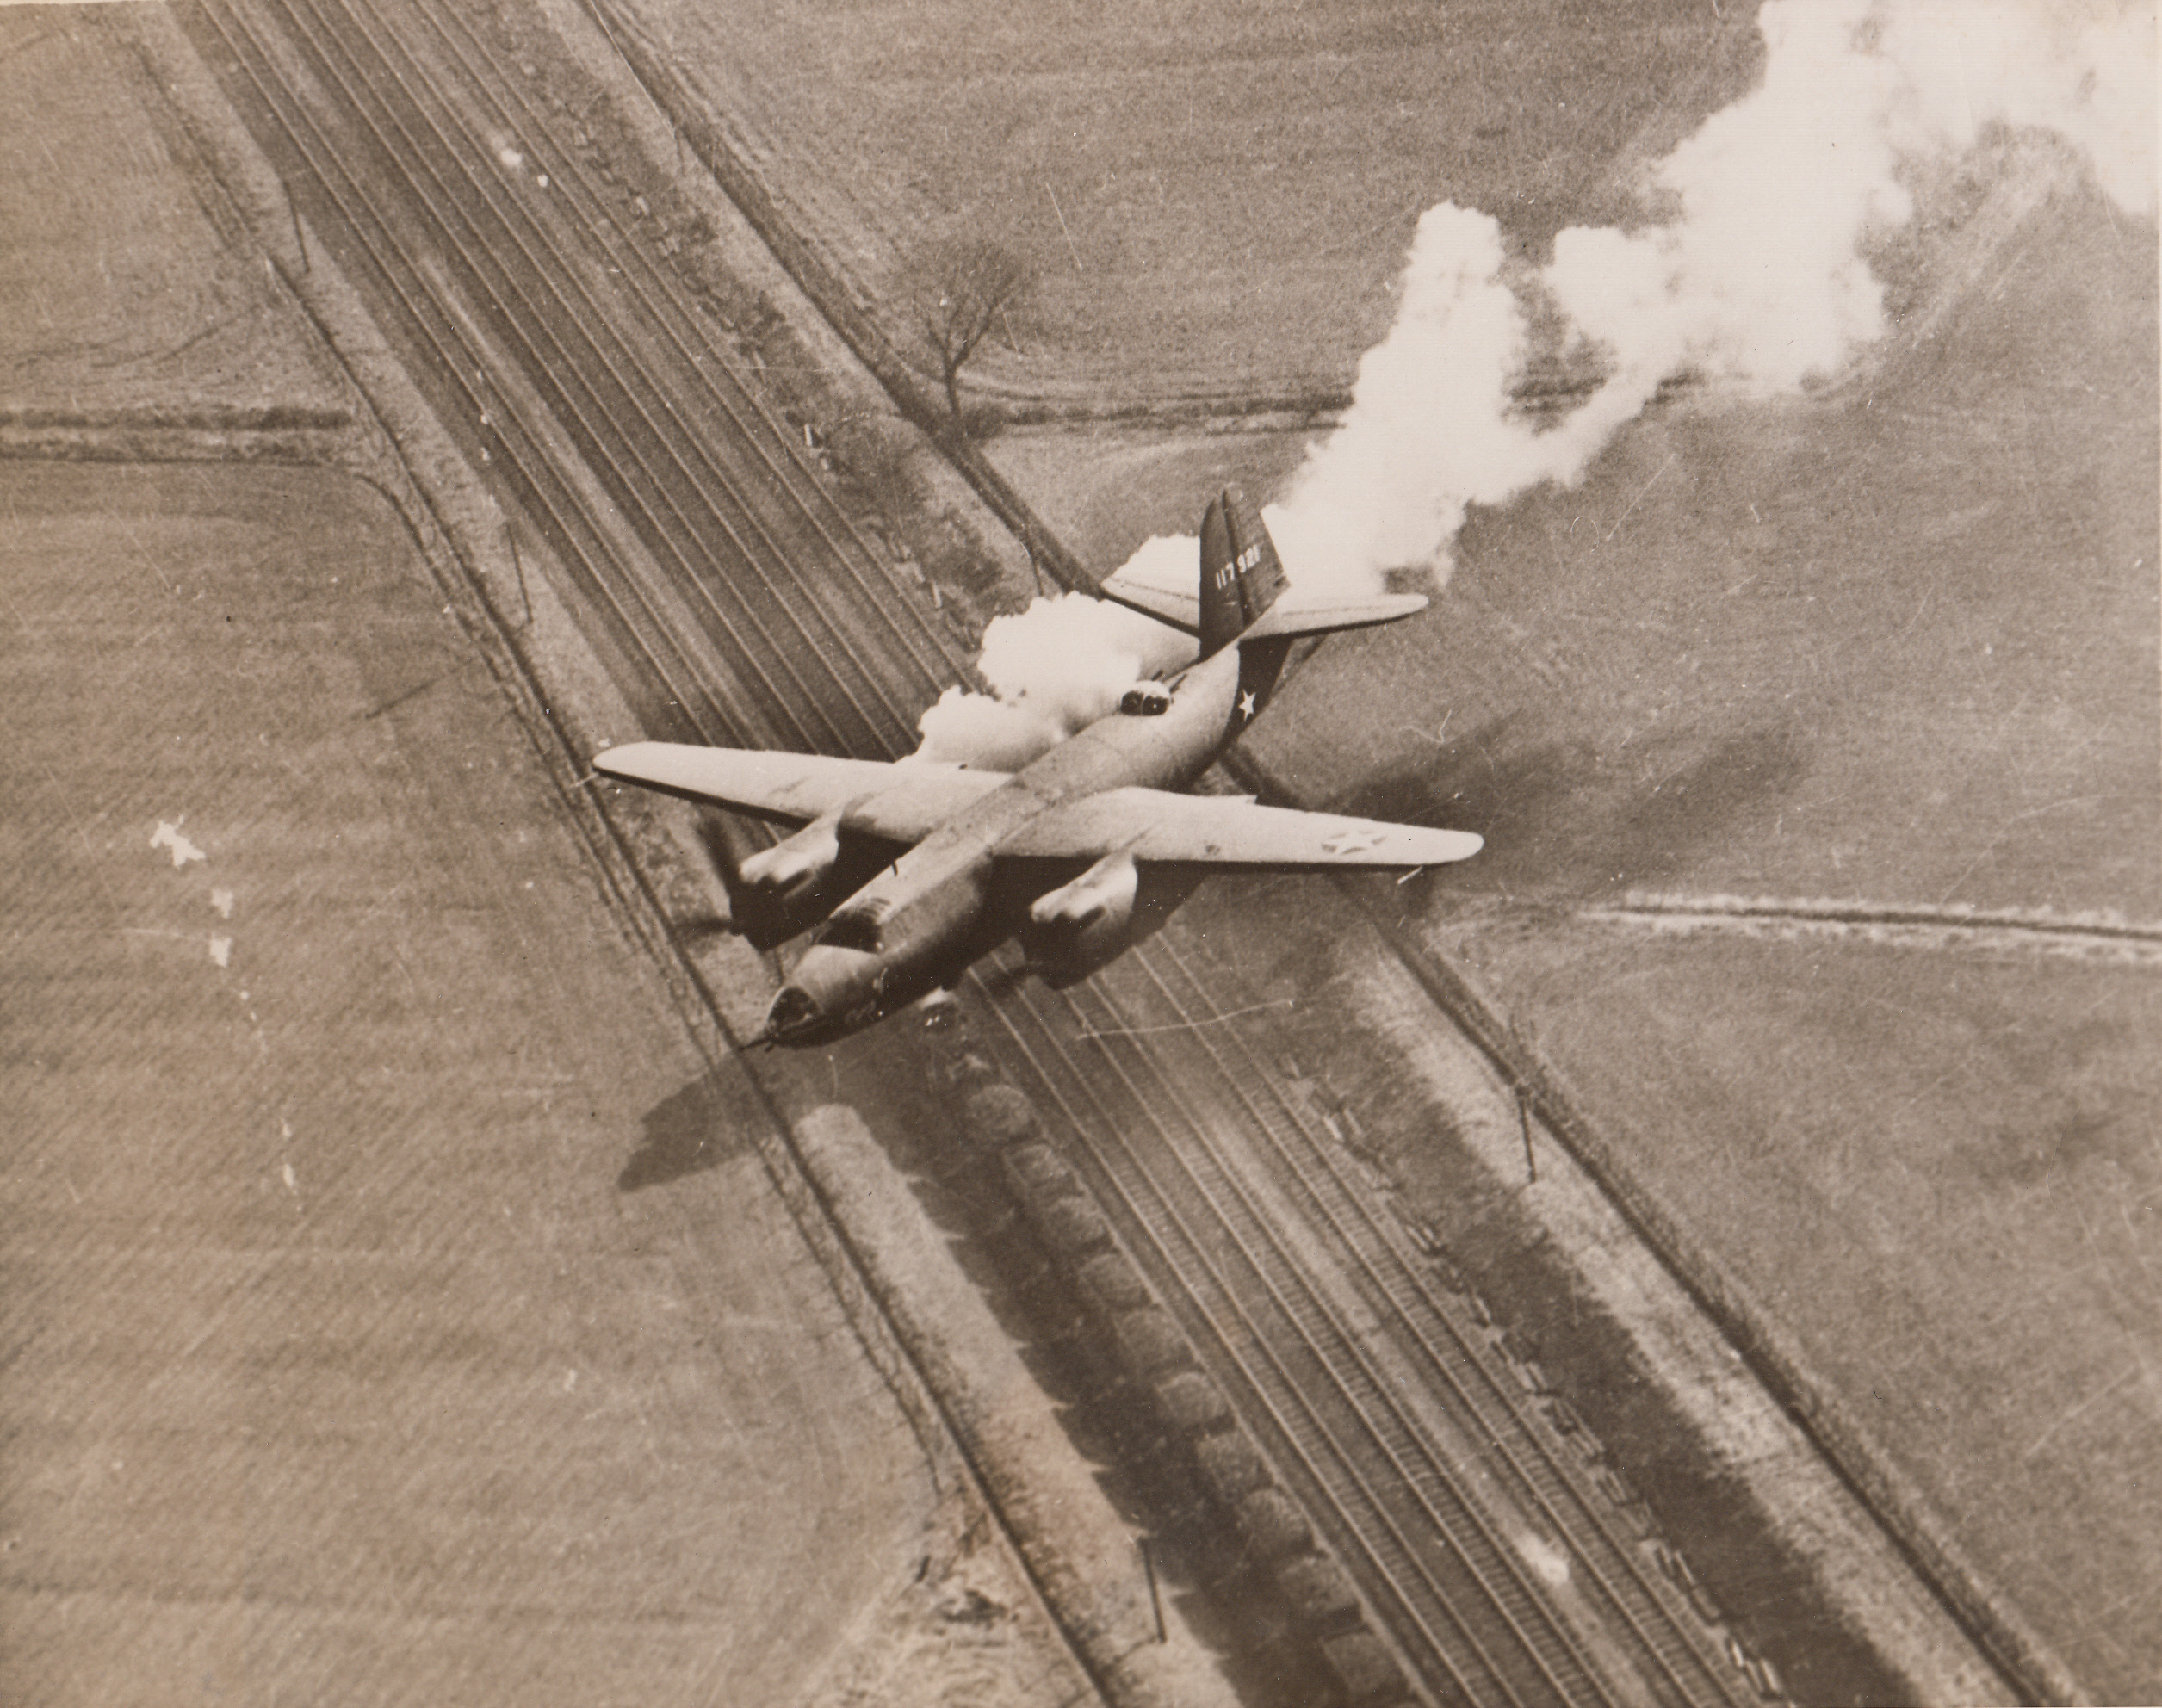 FOOLED YOU, DIDN'T IT?, 2/16/1944. ENGLAND—At first glance it would seem that this B-26 Marauder is coming home in distress with its right engine ablaze. Actually the white smoke is puffing from a locomotive on the tracks below. A fast-thinking aerial photographer in another Marauder snapped the optical illusion returning from a raid over occupied Europe.;